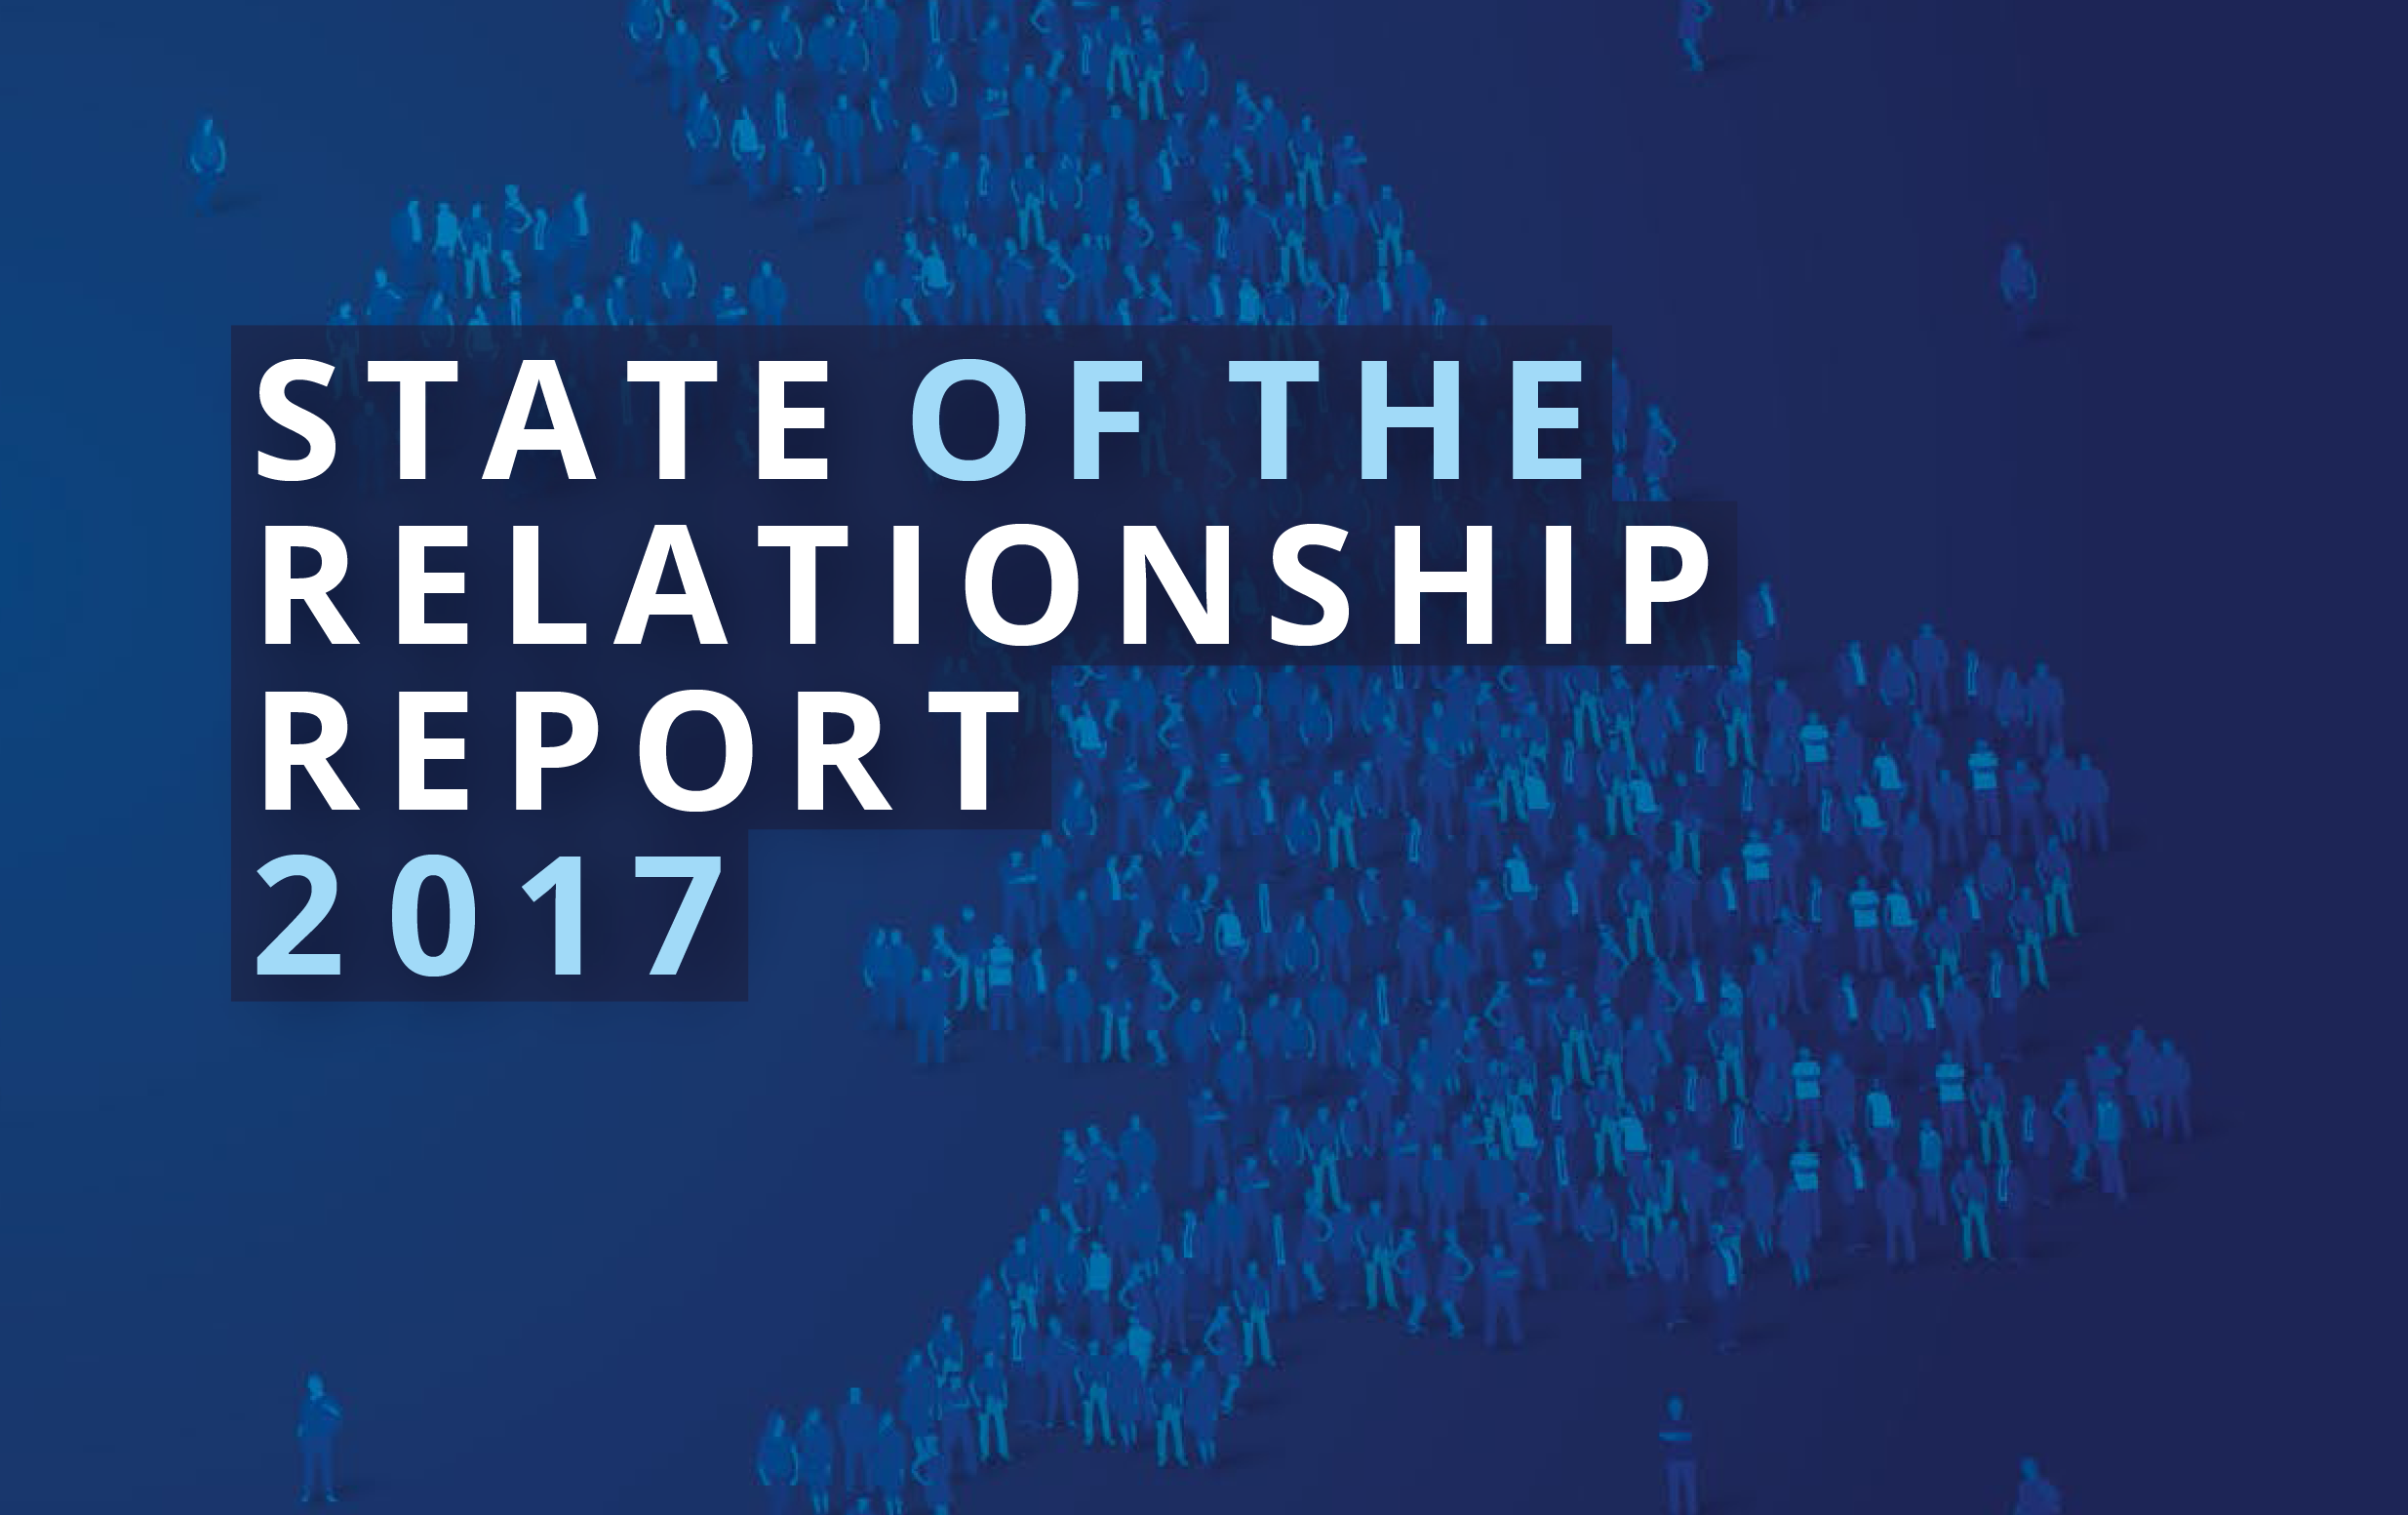 State of the Relationship Report 2017 highlights Leeds & DePuy Synthes partnership